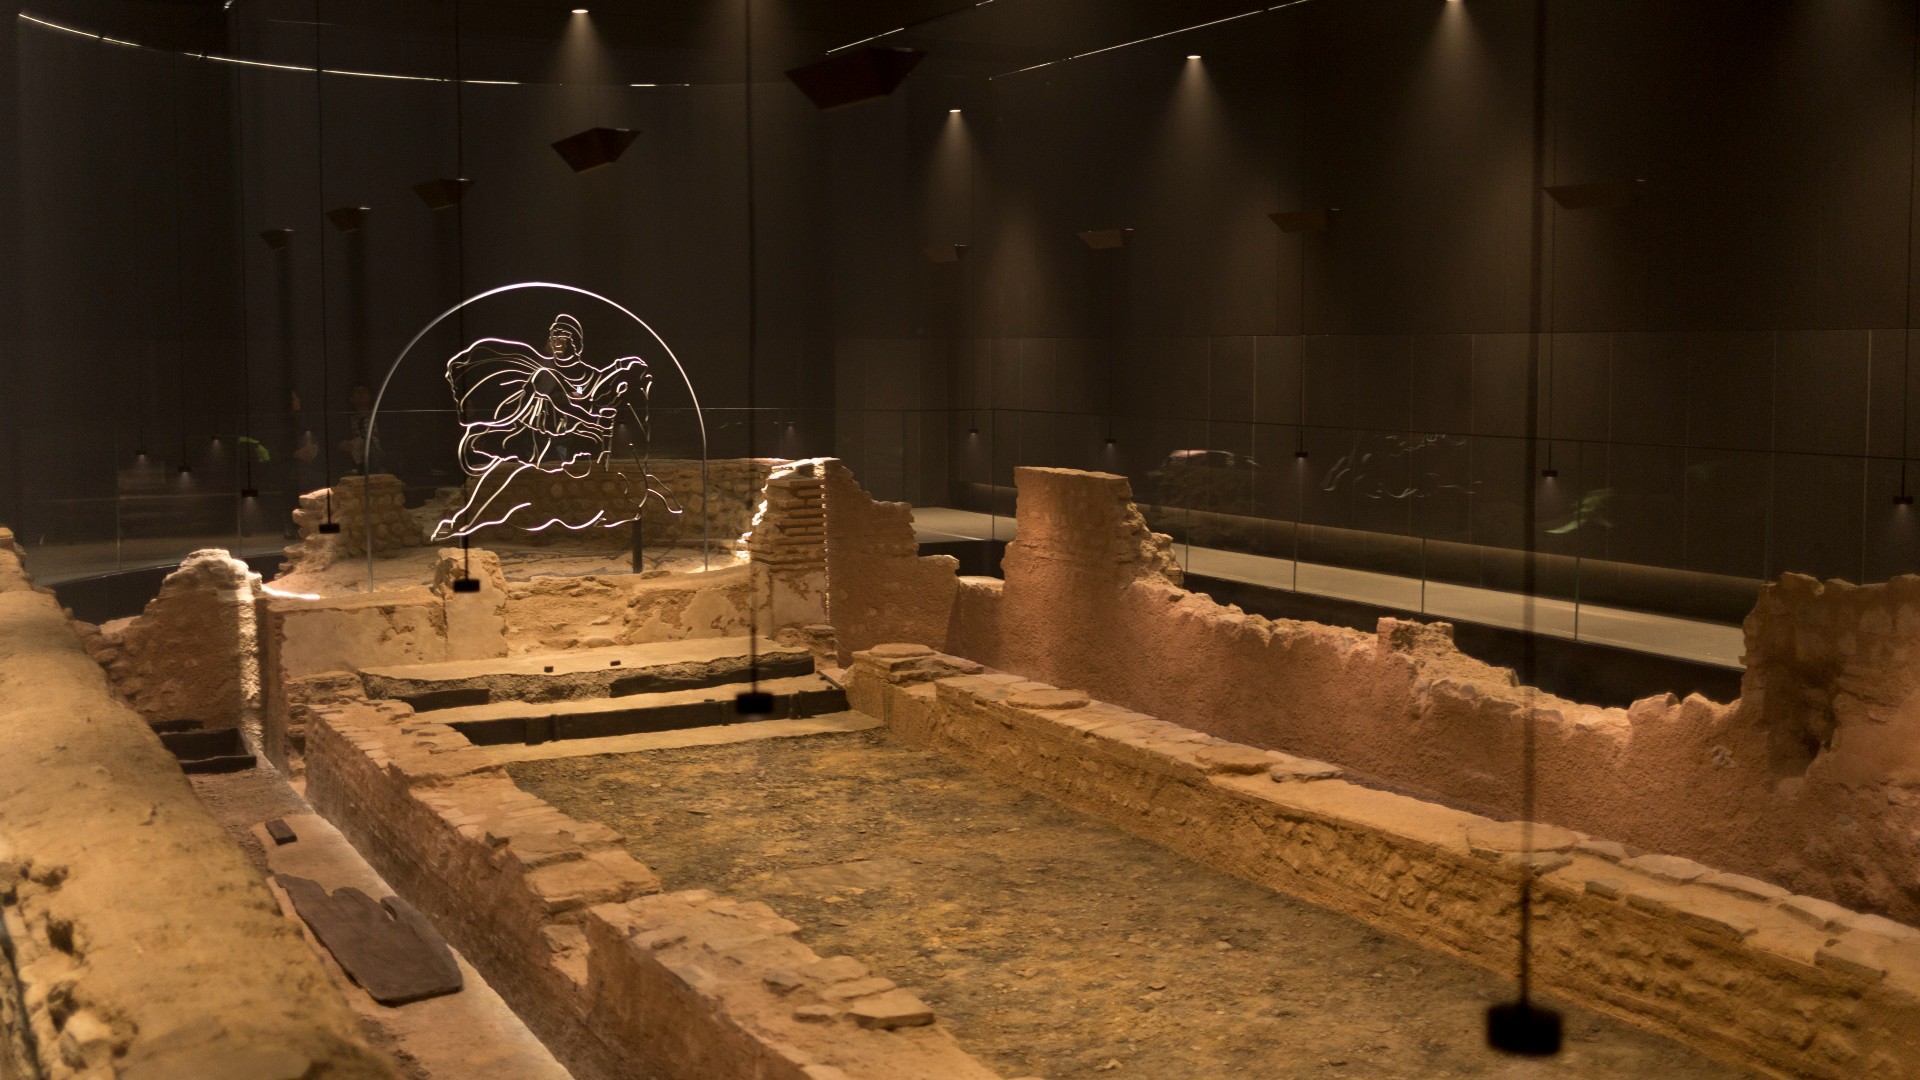 Atmospheric lighting helps display the reconstructed mid-3rd century Roman Mithraeum also known as the Temple of Mithras, Walbrook where bull-sacrifice was practised, now beneath Bloomberg's new European headquarters and open to the public, on 26th November 2017, in the City of London, England.